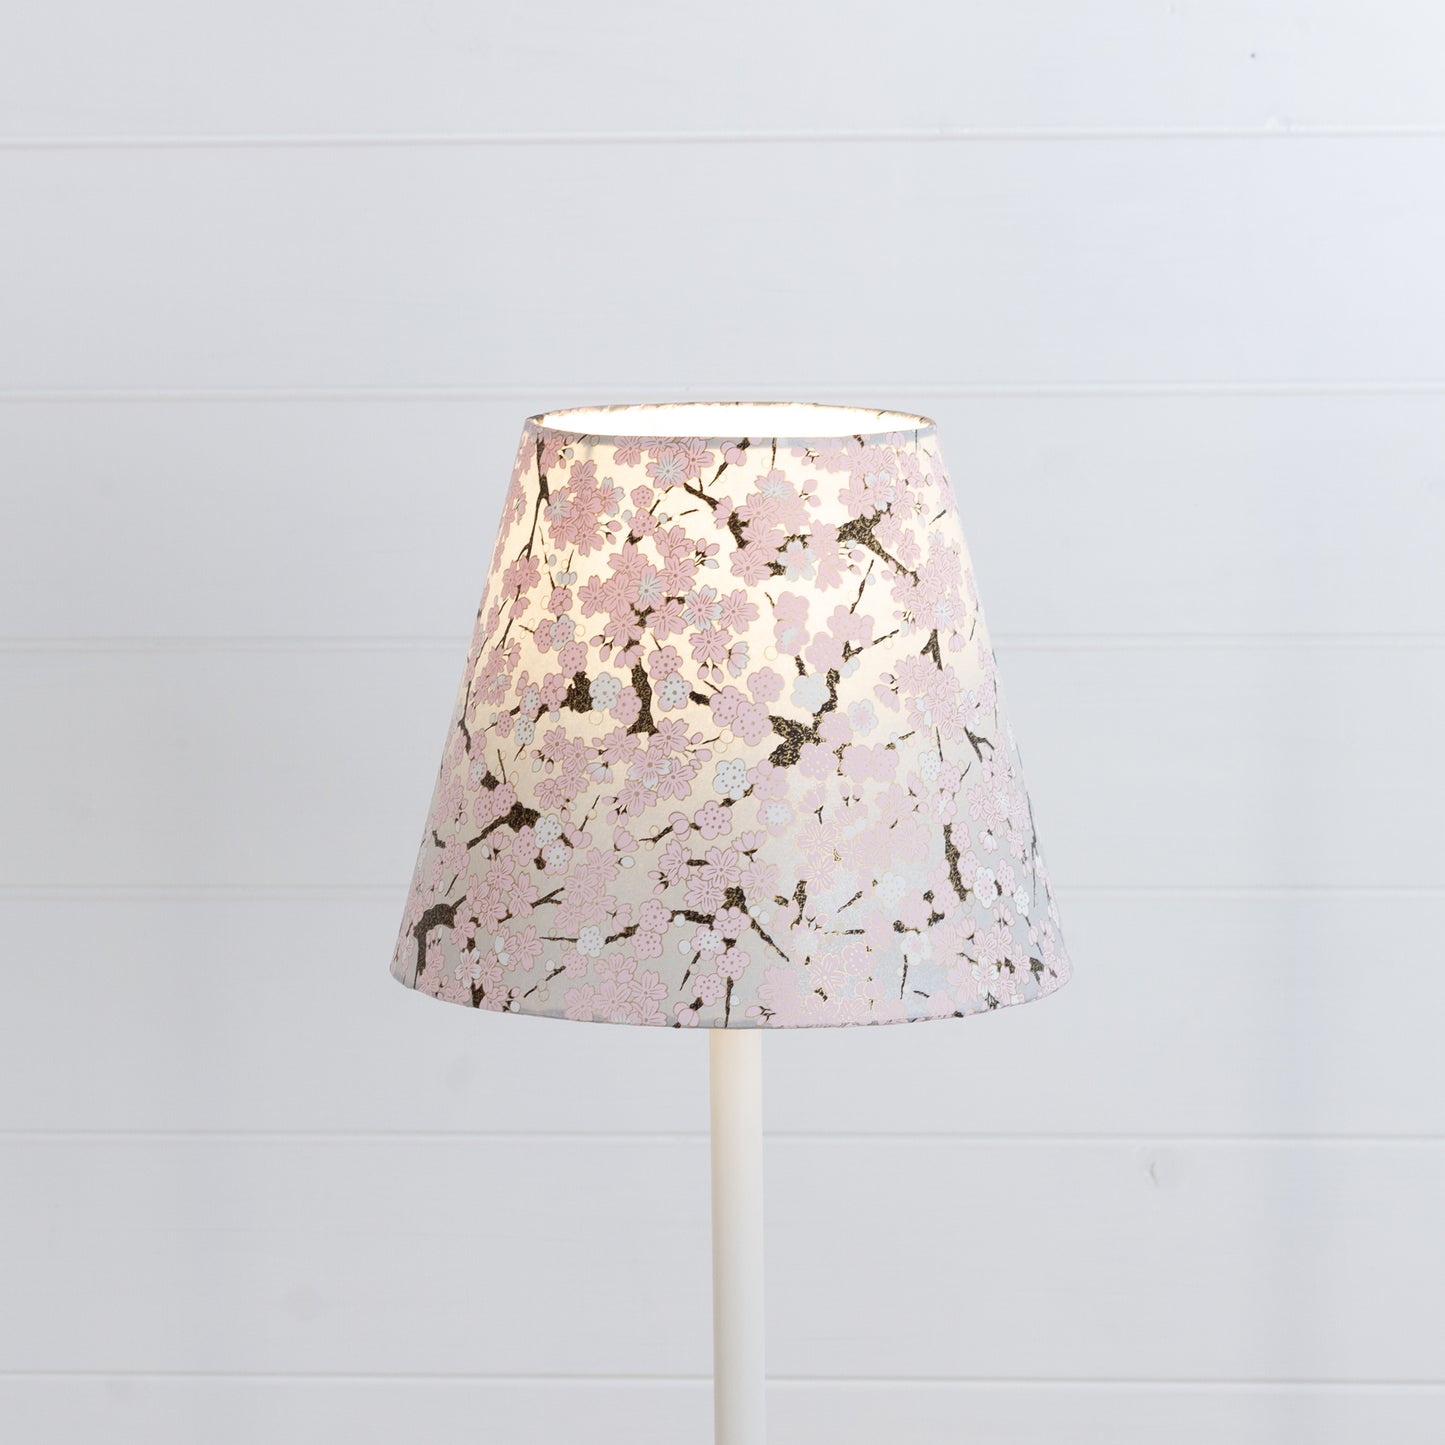 Conical Lamp Shade W02 ~ Pink Cherry Blossom on Grey, 15cm(top) x 25cm(bottom) x 20cm(height)